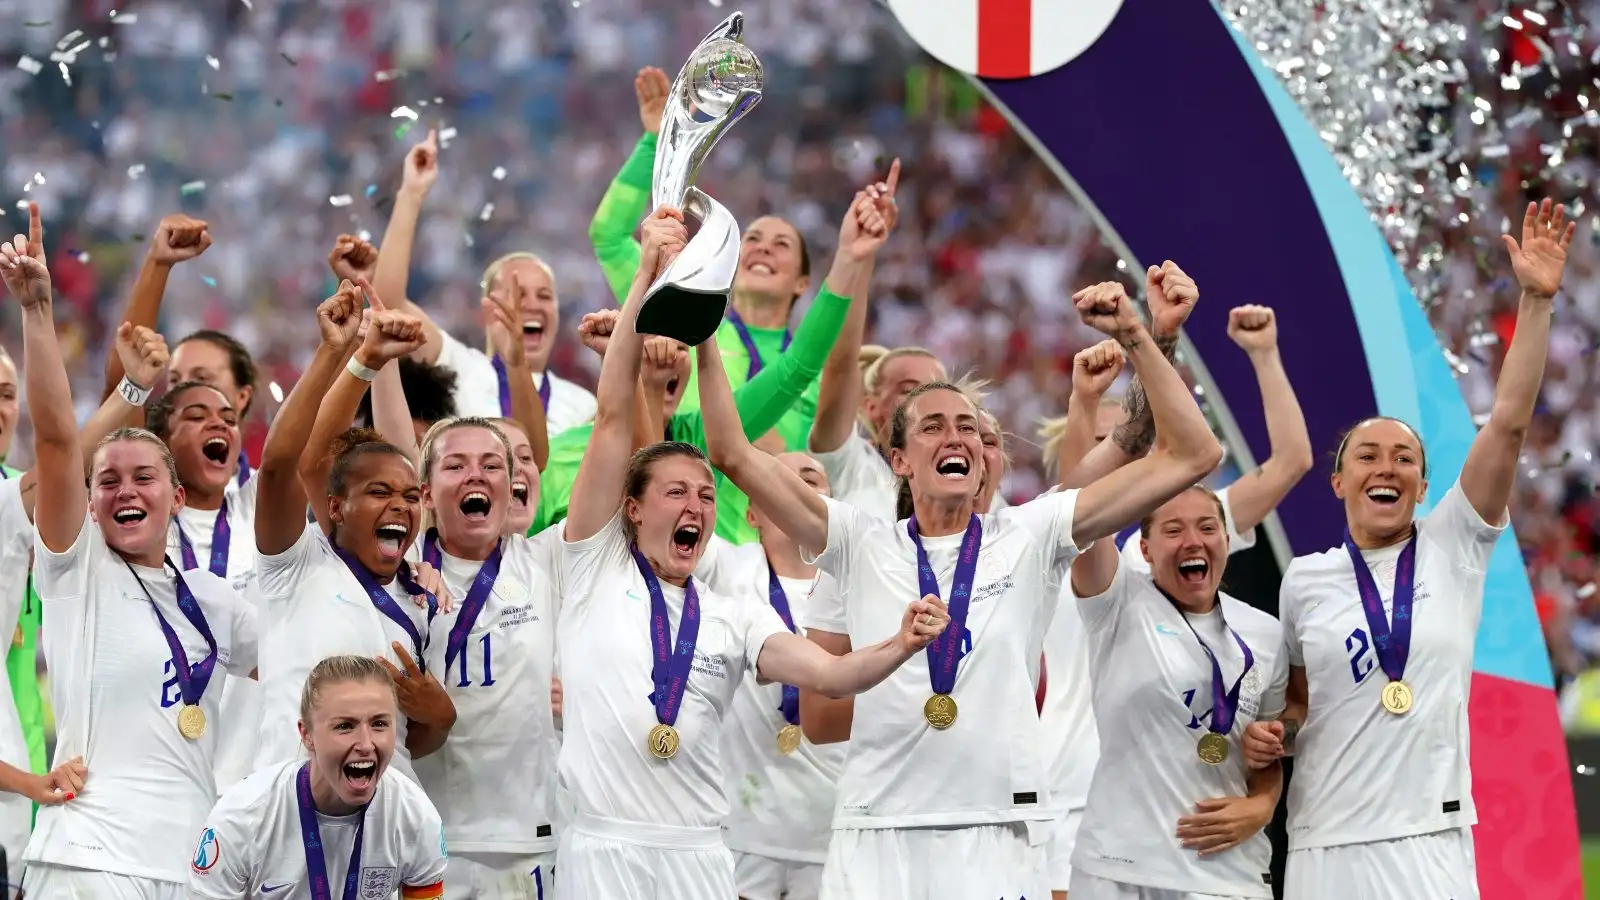 England lift the Euro 2022 trophy